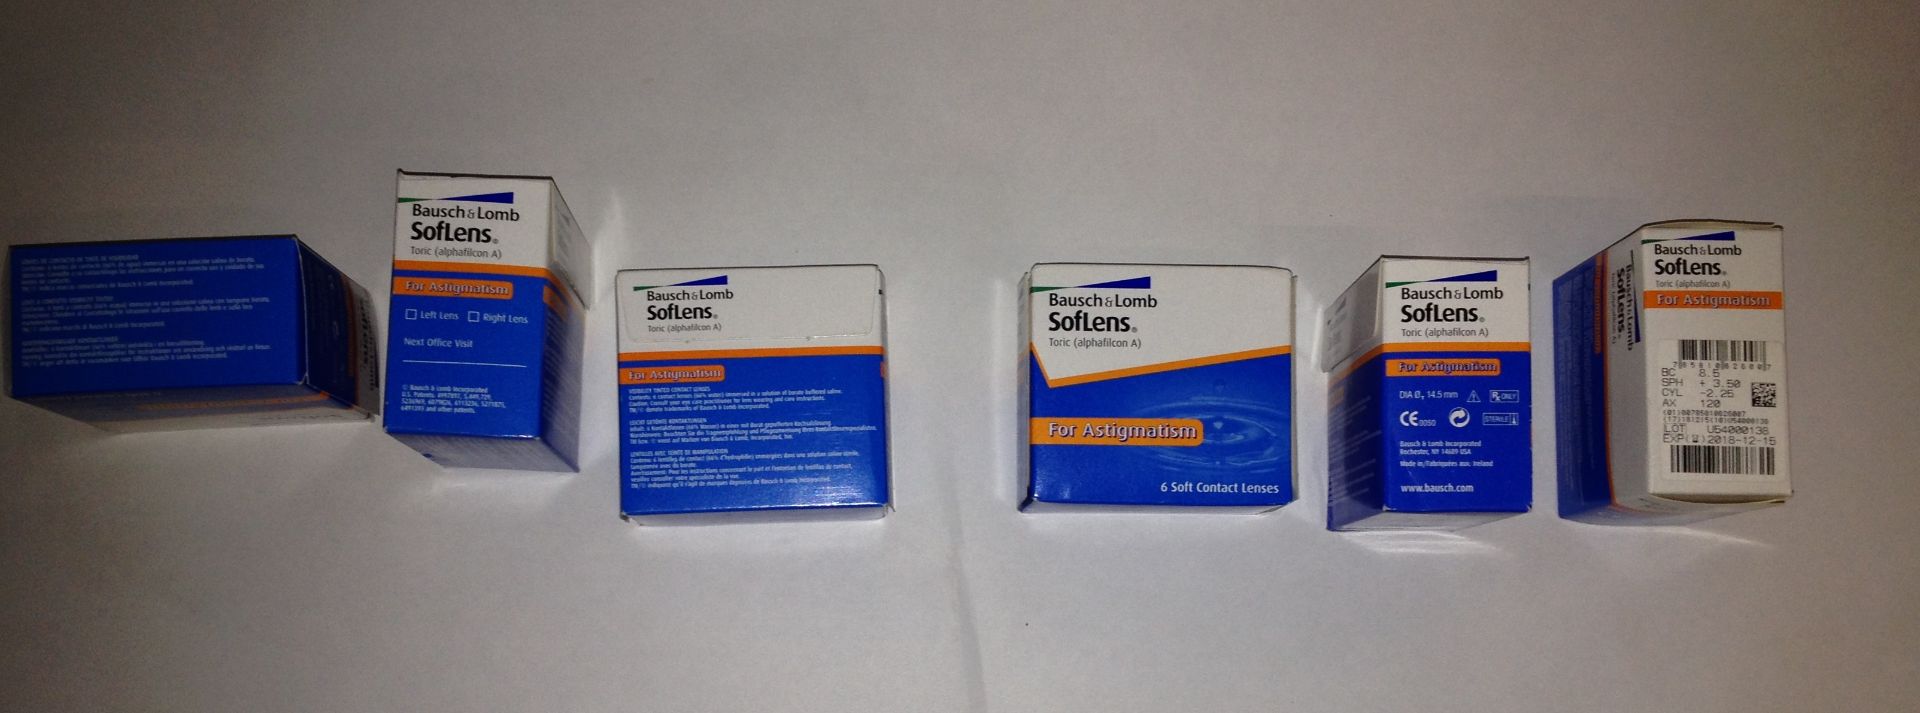 45 x 6 x Bausch & Lomb Softlens Toric (alphafilicon A) For Astigmatism contact lenses - Image 2 of 2